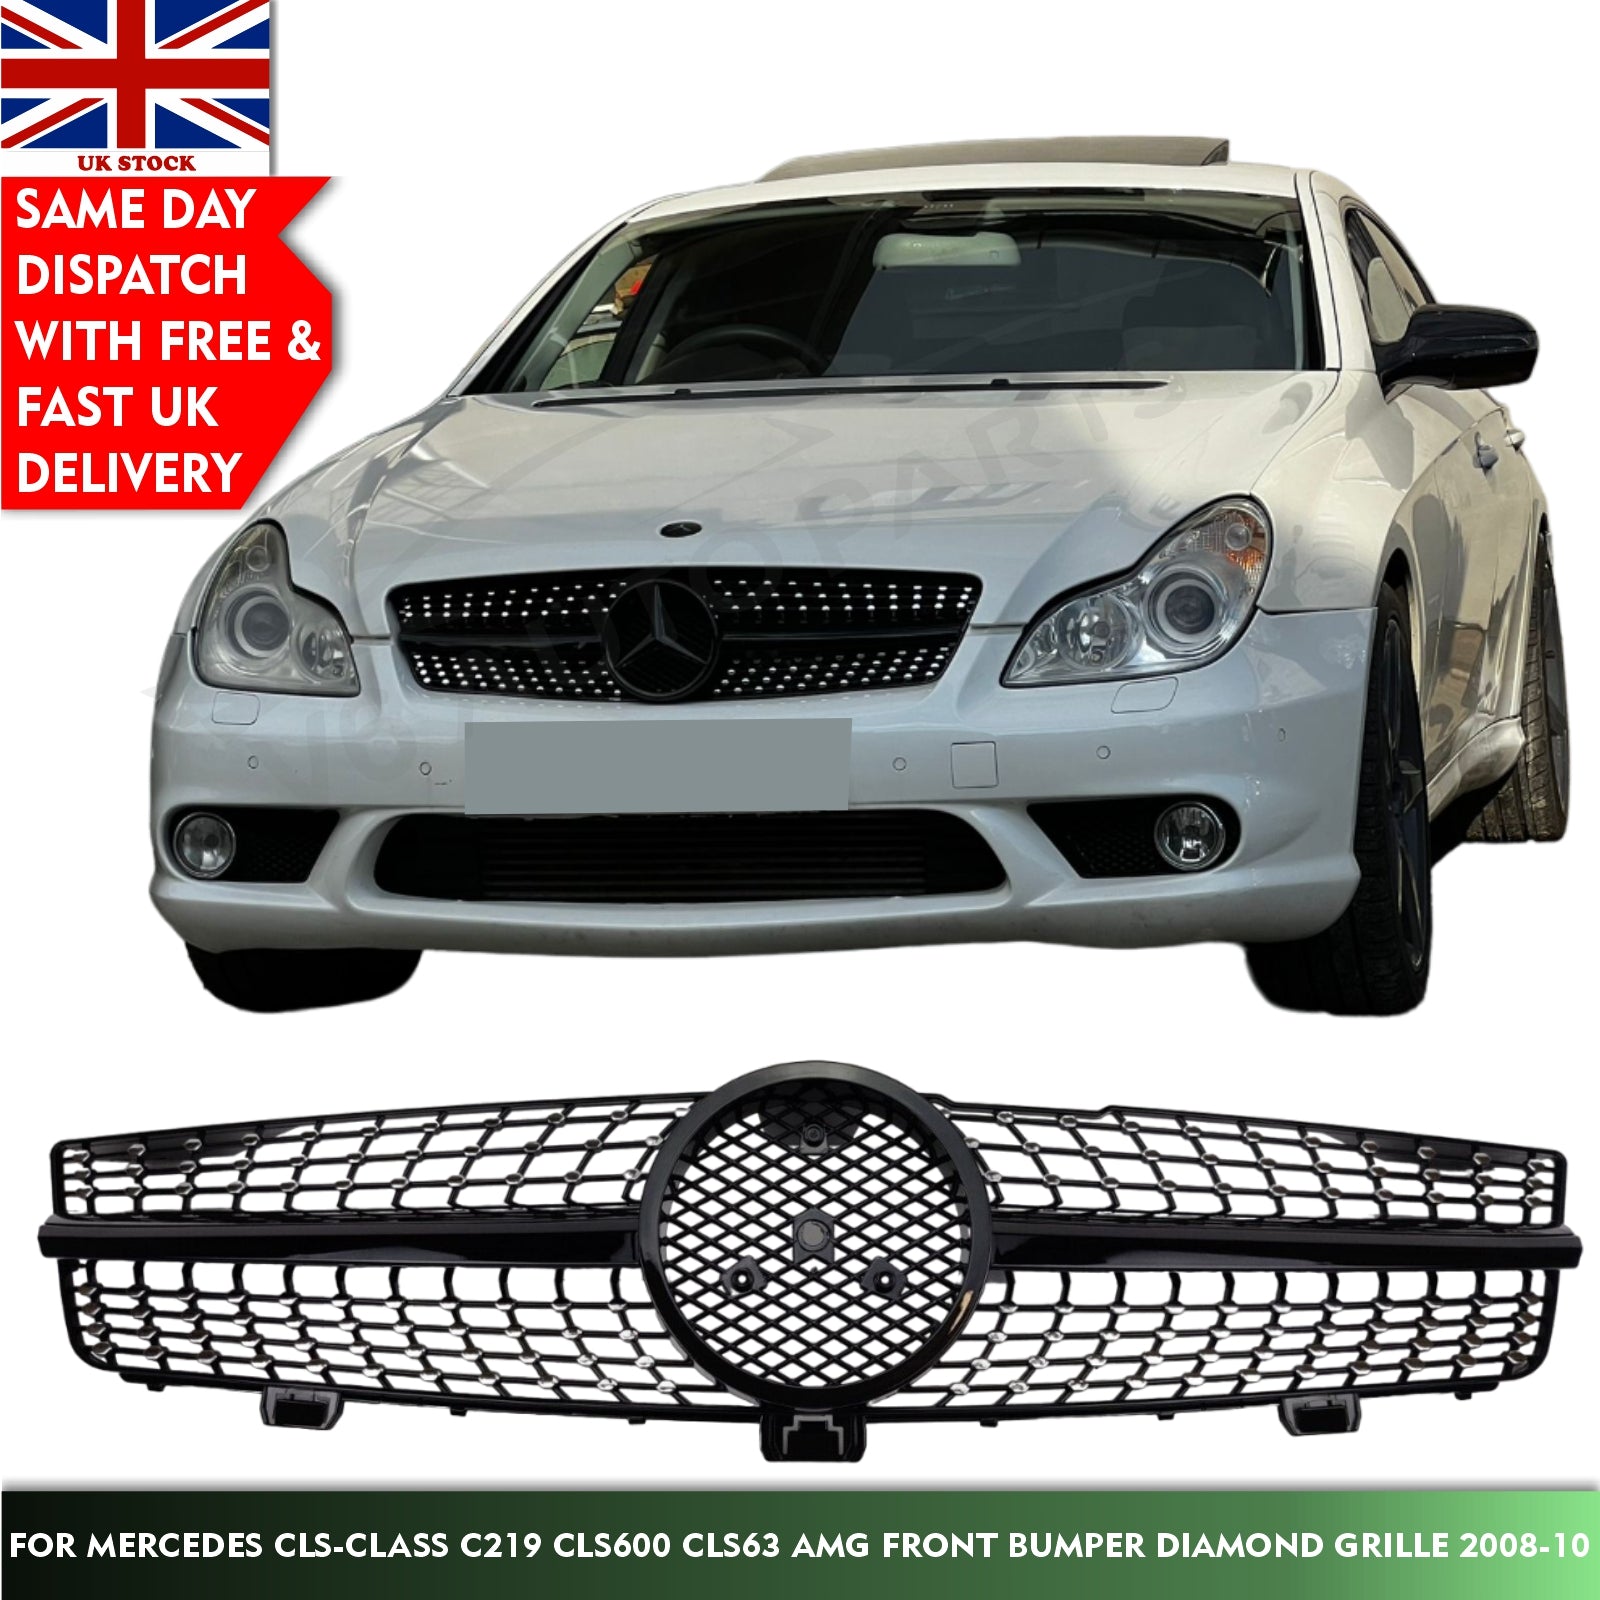 For Mercedes CLS-Class C219 CLS600 CLS63 AMG Front Bumper Diamond Grille 2008-10